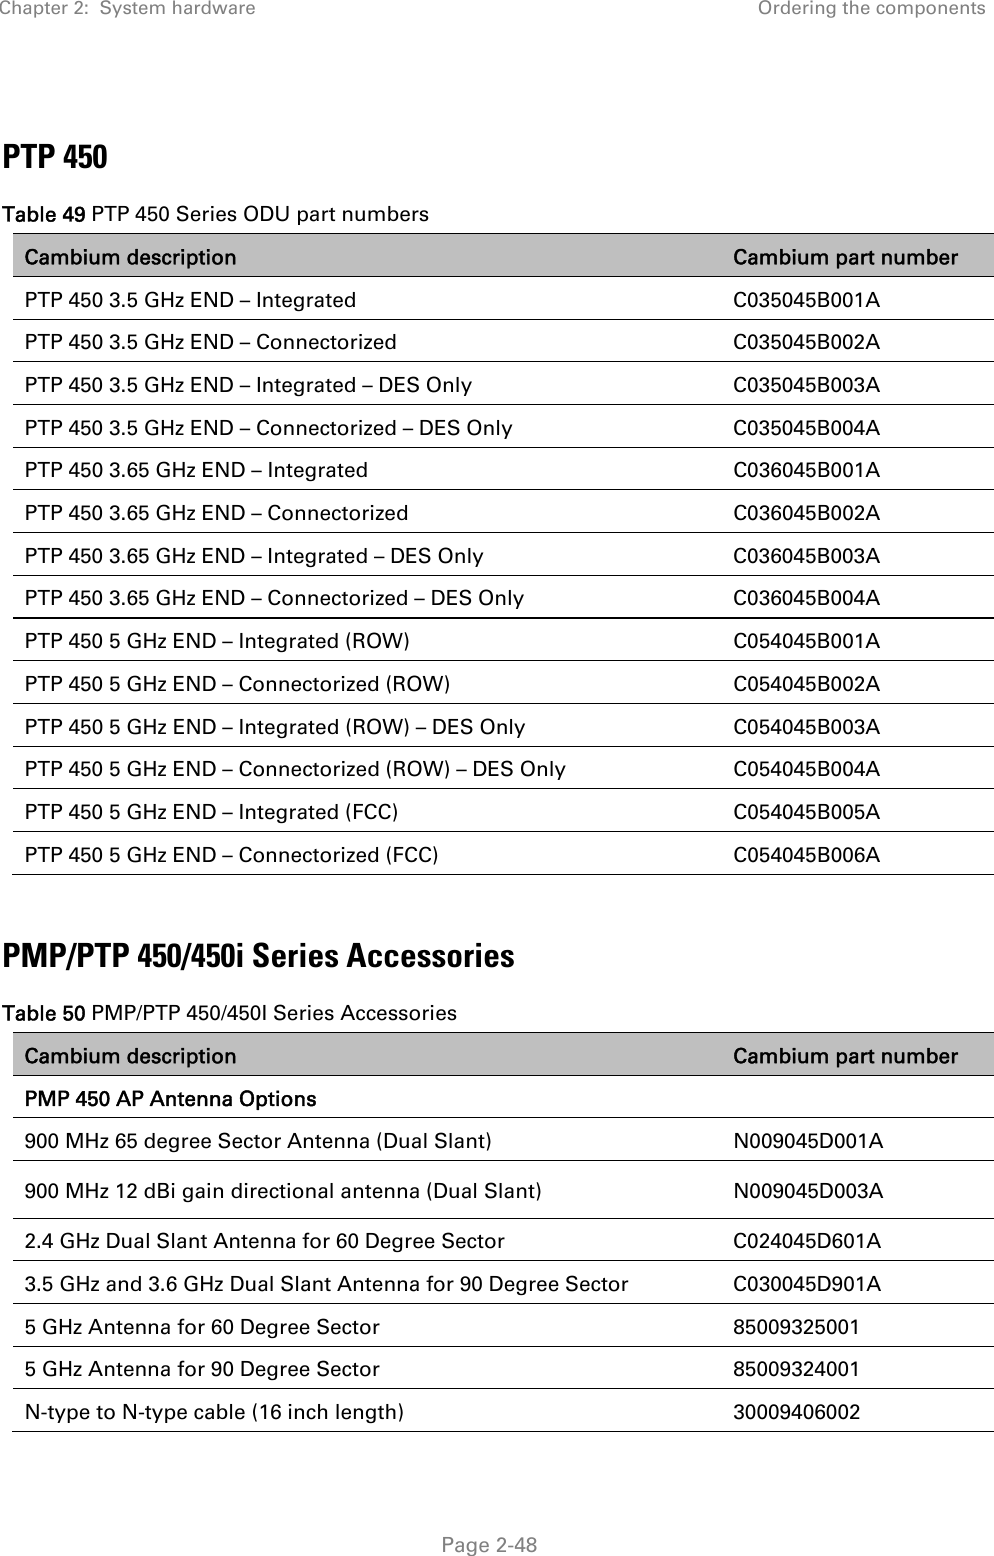 Chapter 2:  System hardware  Ordering the components   Page 2-48  PTP 450 Table 49 PTP 450 Series ODU part numbers Cambium description  Cambium part number PTP 450 3.5 GHz END – Integrated  C035045B001A PTP 450 3.5 GHz END – Connectorized  C035045B002A PTP 450 3.5 GHz END – Integrated – DES Only  C035045B003A PTP 450 3.5 GHz END – Connectorized – DES Only  C035045B004A PTP 450 3.65 GHz END – Integrated  C036045B001A PTP 450 3.65 GHz END – Connectorized  C036045B002A PTP 450 3.65 GHz END – Integrated – DES Only  C036045B003A PTP 450 3.65 GHz END – Connectorized – DES Only  C036045B004A PTP 450 5 GHz END – Integrated (ROW)  C054045B001A PTP 450 5 GHz END – Connectorized (ROW)  C054045B002A PTP 450 5 GHz END – Integrated (ROW) – DES Only  C054045B003A PTP 450 5 GHz END – Connectorized (ROW) – DES Only  C054045B004A PTP 450 5 GHz END – Integrated (FCC)  C054045B005A PTP 450 5 GHz END – Connectorized (FCC)  C054045B006A  PMP/PTP 450/450i Series Accessories Table 50 PMP/PTP 450/450I Series Accessories Cambium description  Cambium part number PMP 450 AP Antenna Options   900 MHz 65 degree Sector Antenna (Dual Slant) N009045D001A 900 MHz 12 dBi gain directional antenna (Dual Slant) N009045D003A 2.4 GHz Dual Slant Antenna for 60 Degree Sector  C024045D601A 3.5 GHz and 3.6 GHz Dual Slant Antenna for 90 Degree Sector  C030045D901A 5 GHz Antenna for 60 Degree Sector  85009325001 5 GHz Antenna for 90 Degree Sector  85009324001 N-type to N-type cable (16 inch length)  30009406002 